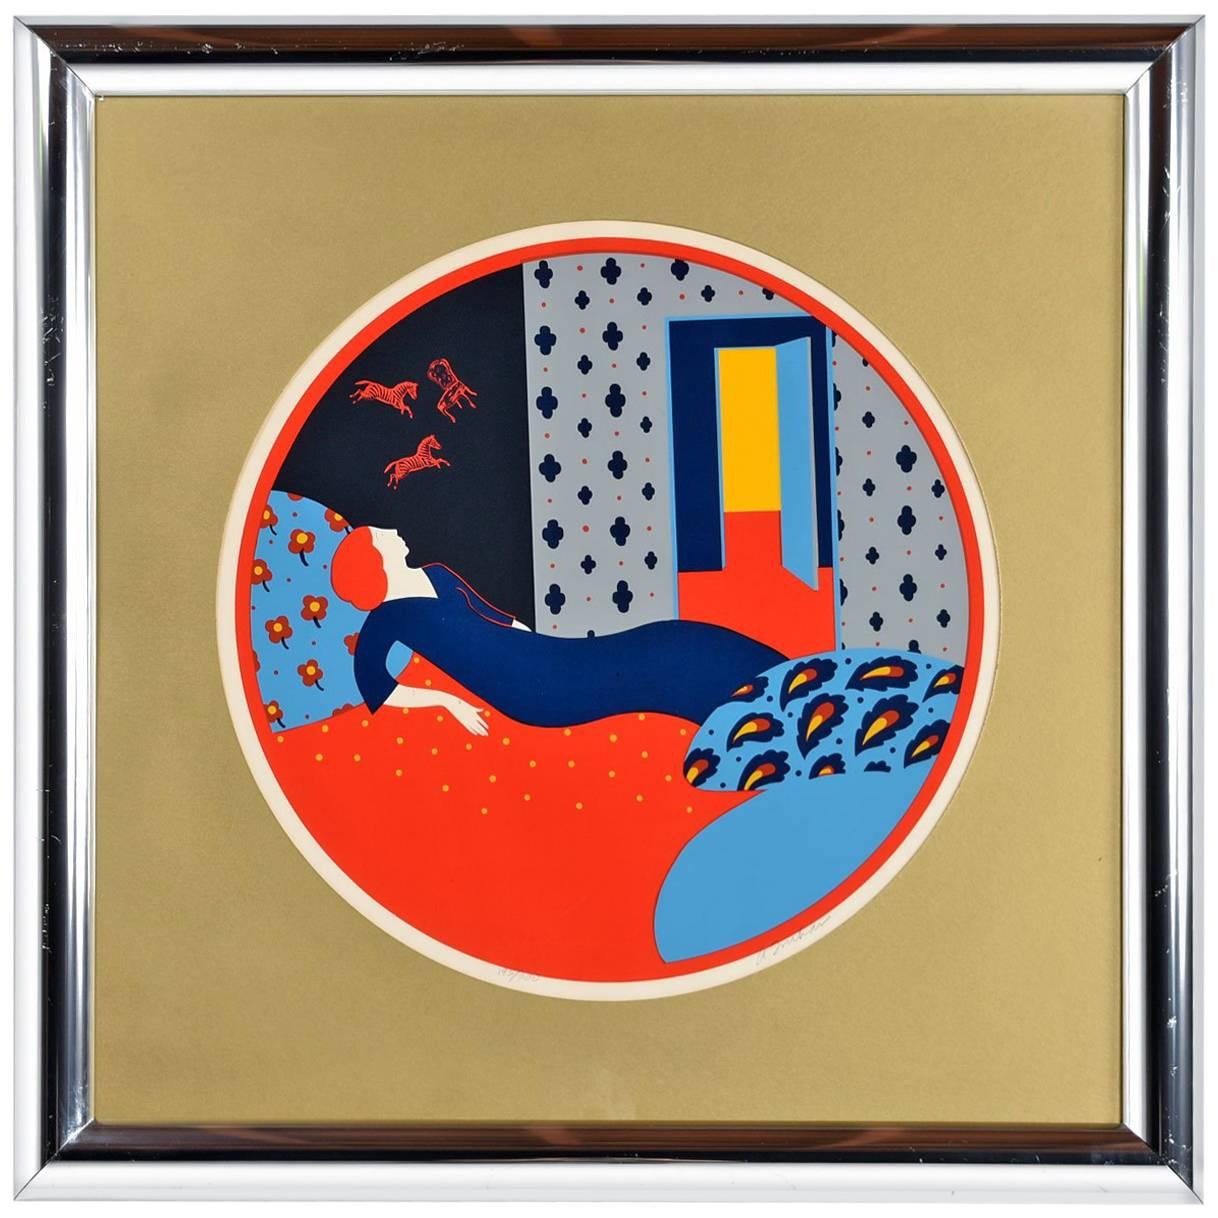 Greg Copeland Signed and Numbered Serigraph in Bullnose Chrome Frame, 1973